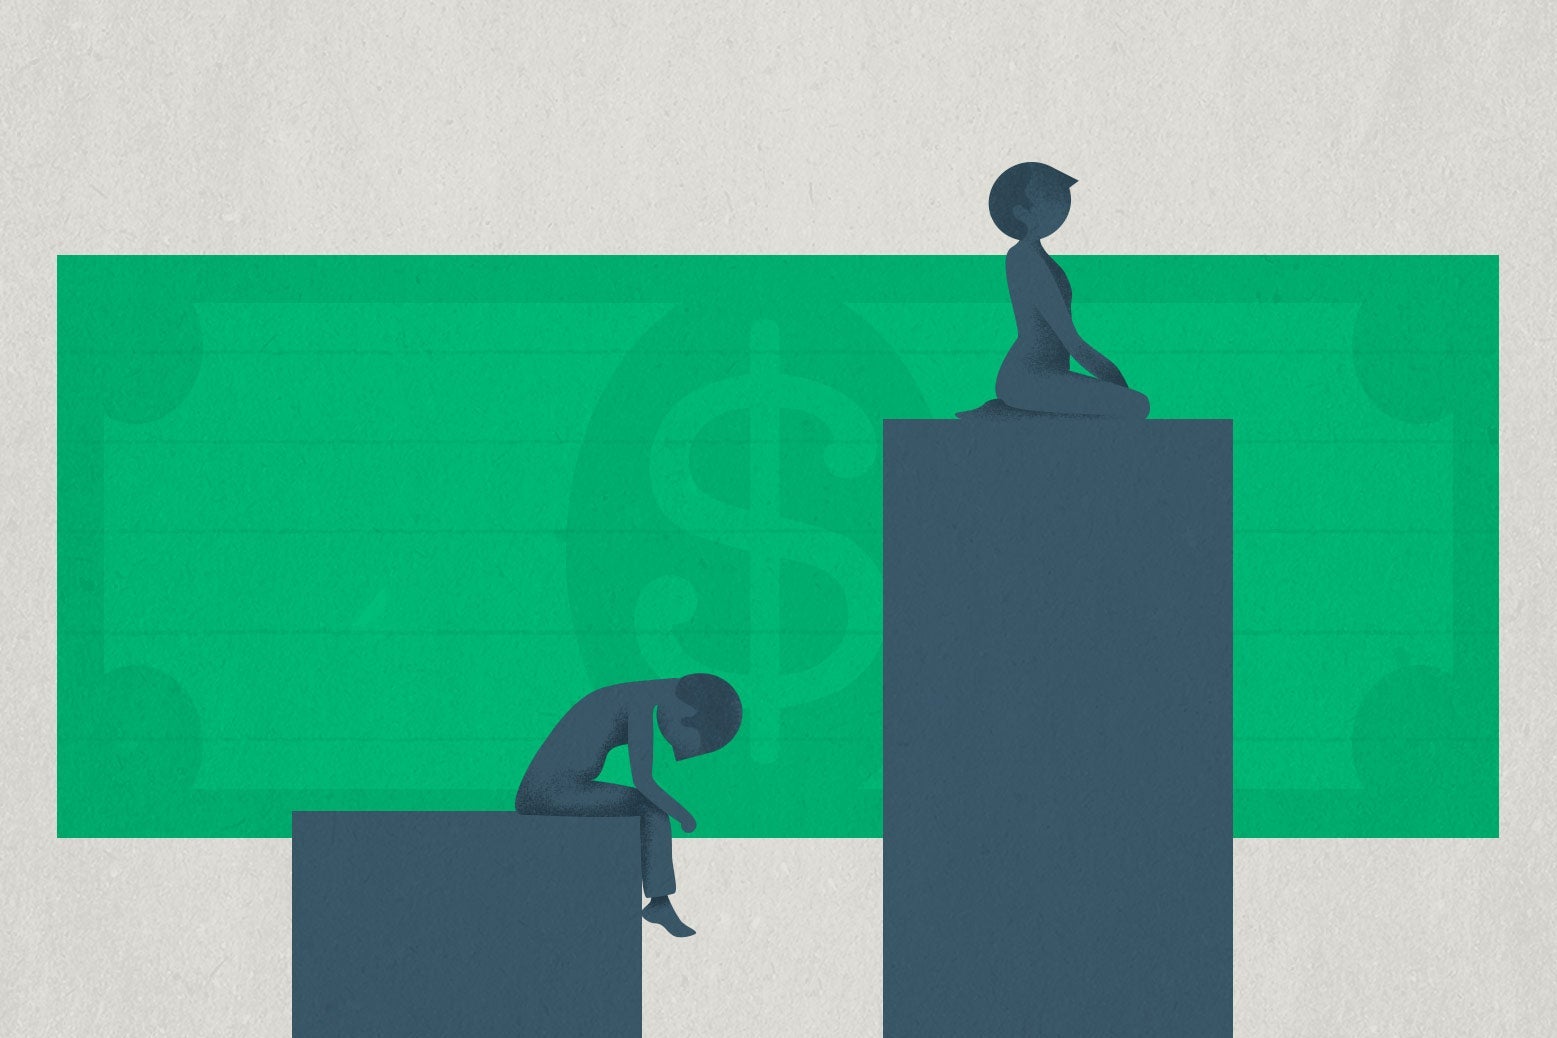 A bar chart in front of a dollar. The higher bar has a person sitting up on it. The lower bar has a person sitting down and bending over in despair.